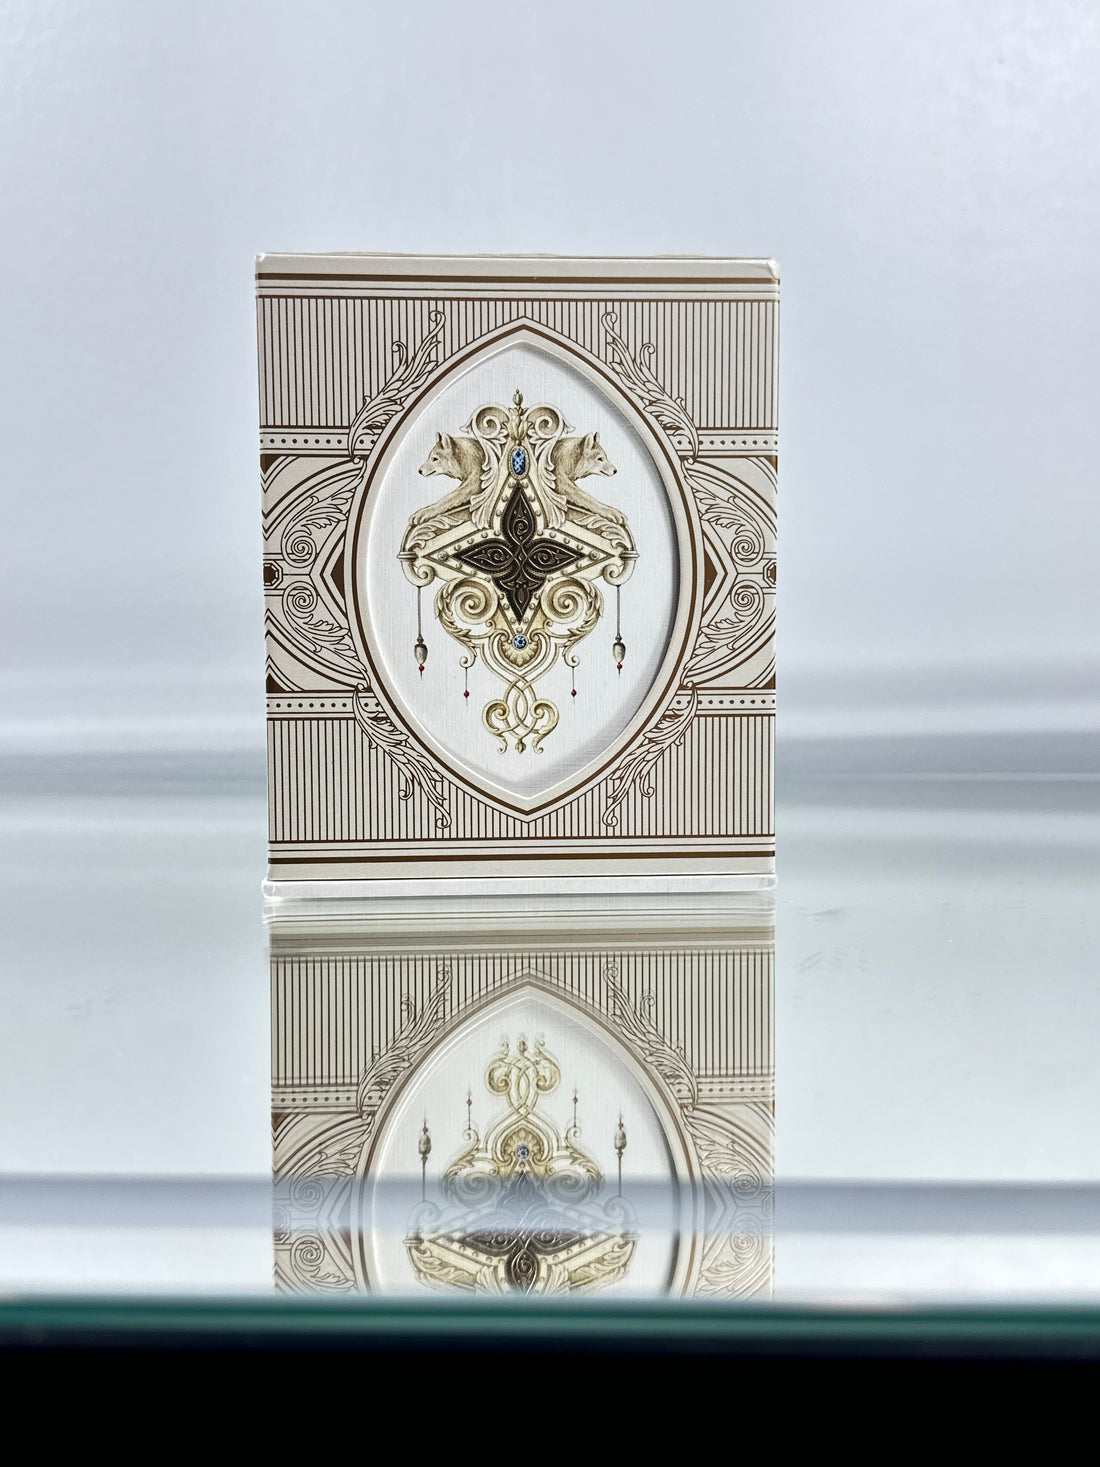 Kingdom Classic (Silver) Playing Card Collection Boxset